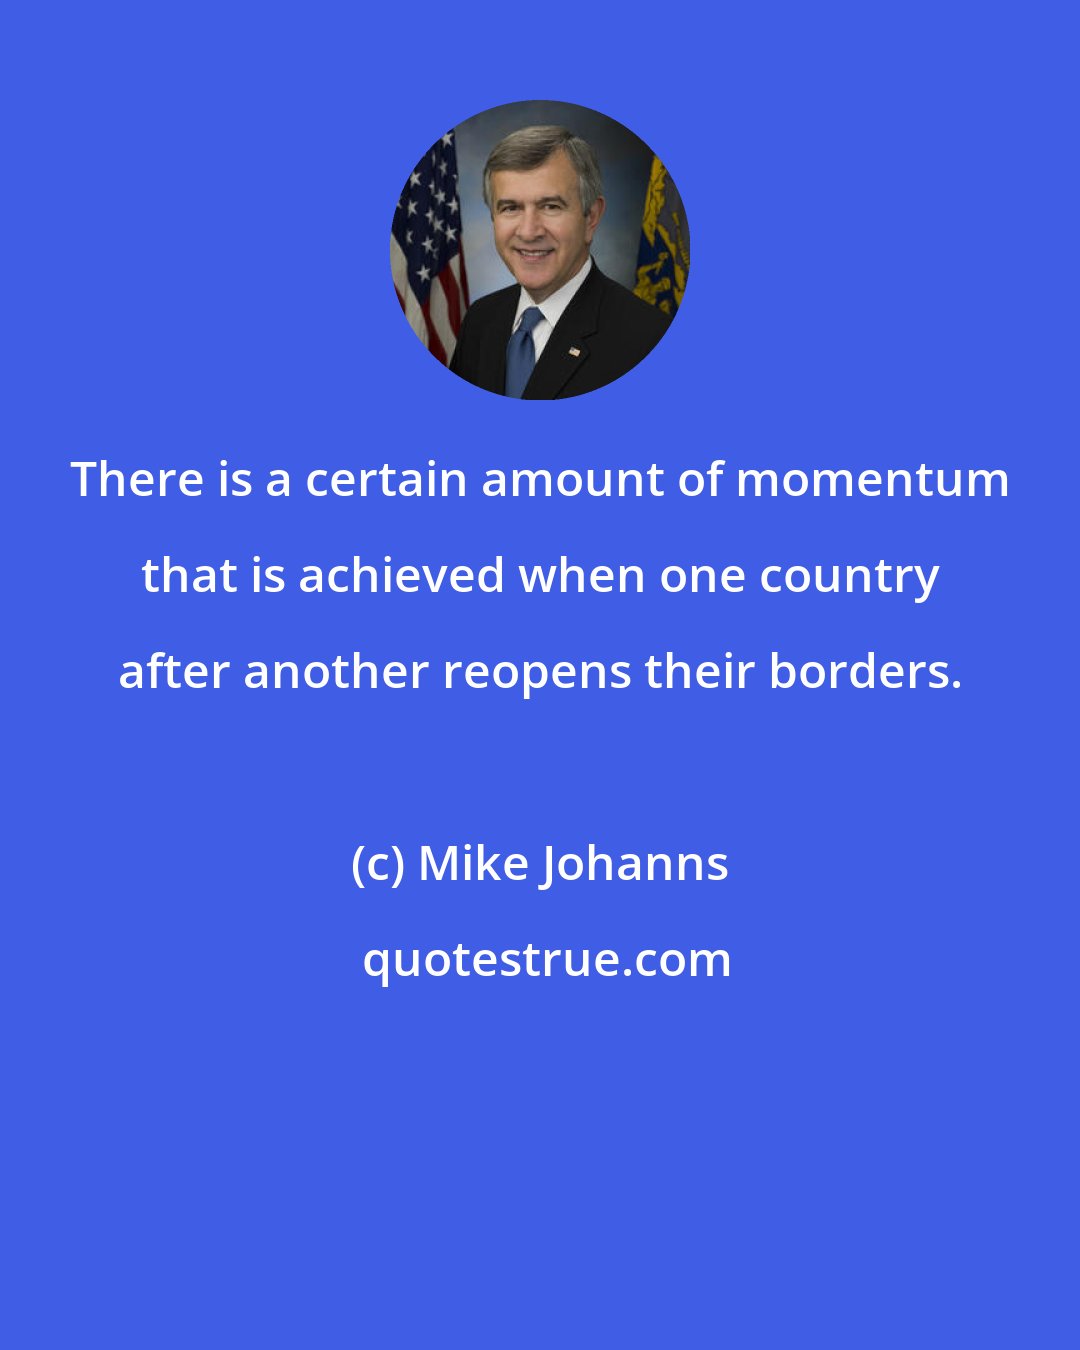 Mike Johanns: There is a certain amount of momentum that is achieved when one country after another reopens their borders.